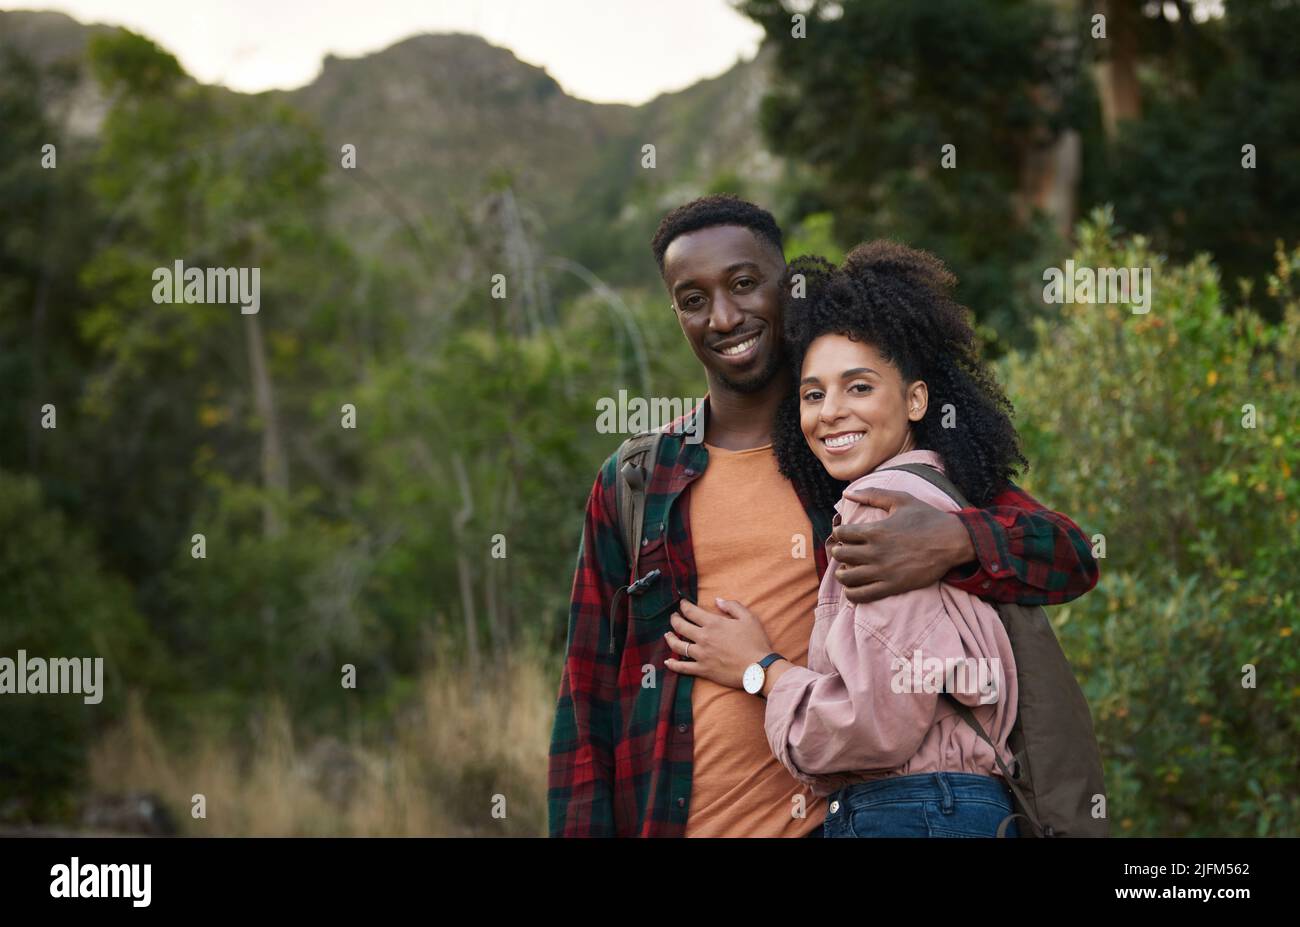 Smiling young multiethnic couple standing arm in arm on a hiking trail Stock Photo